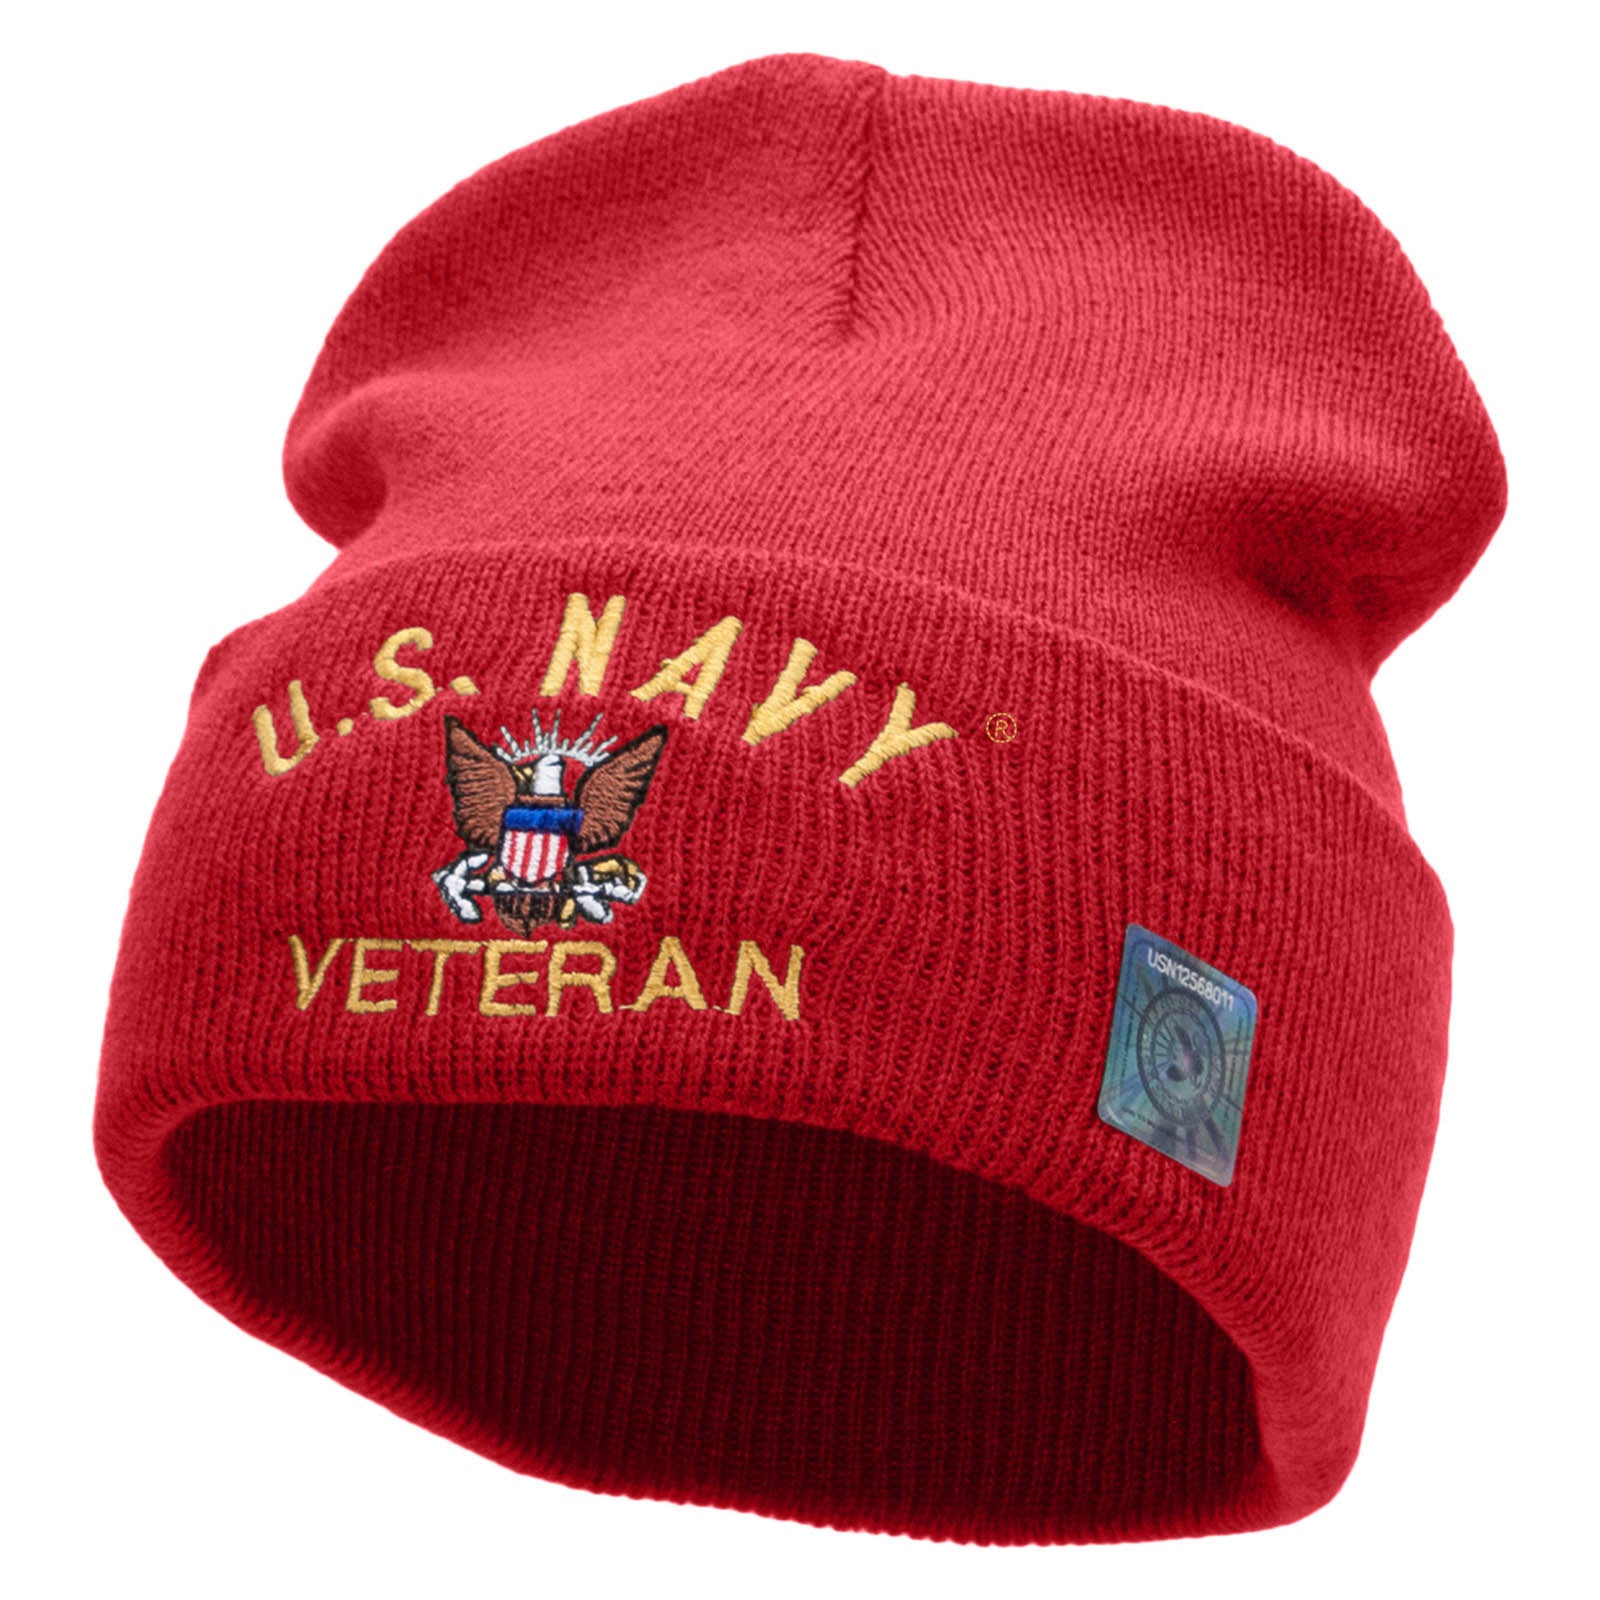 Licensed US Navy Veteran Military Embroidered Long Beanie Made in USA - Red OSFM